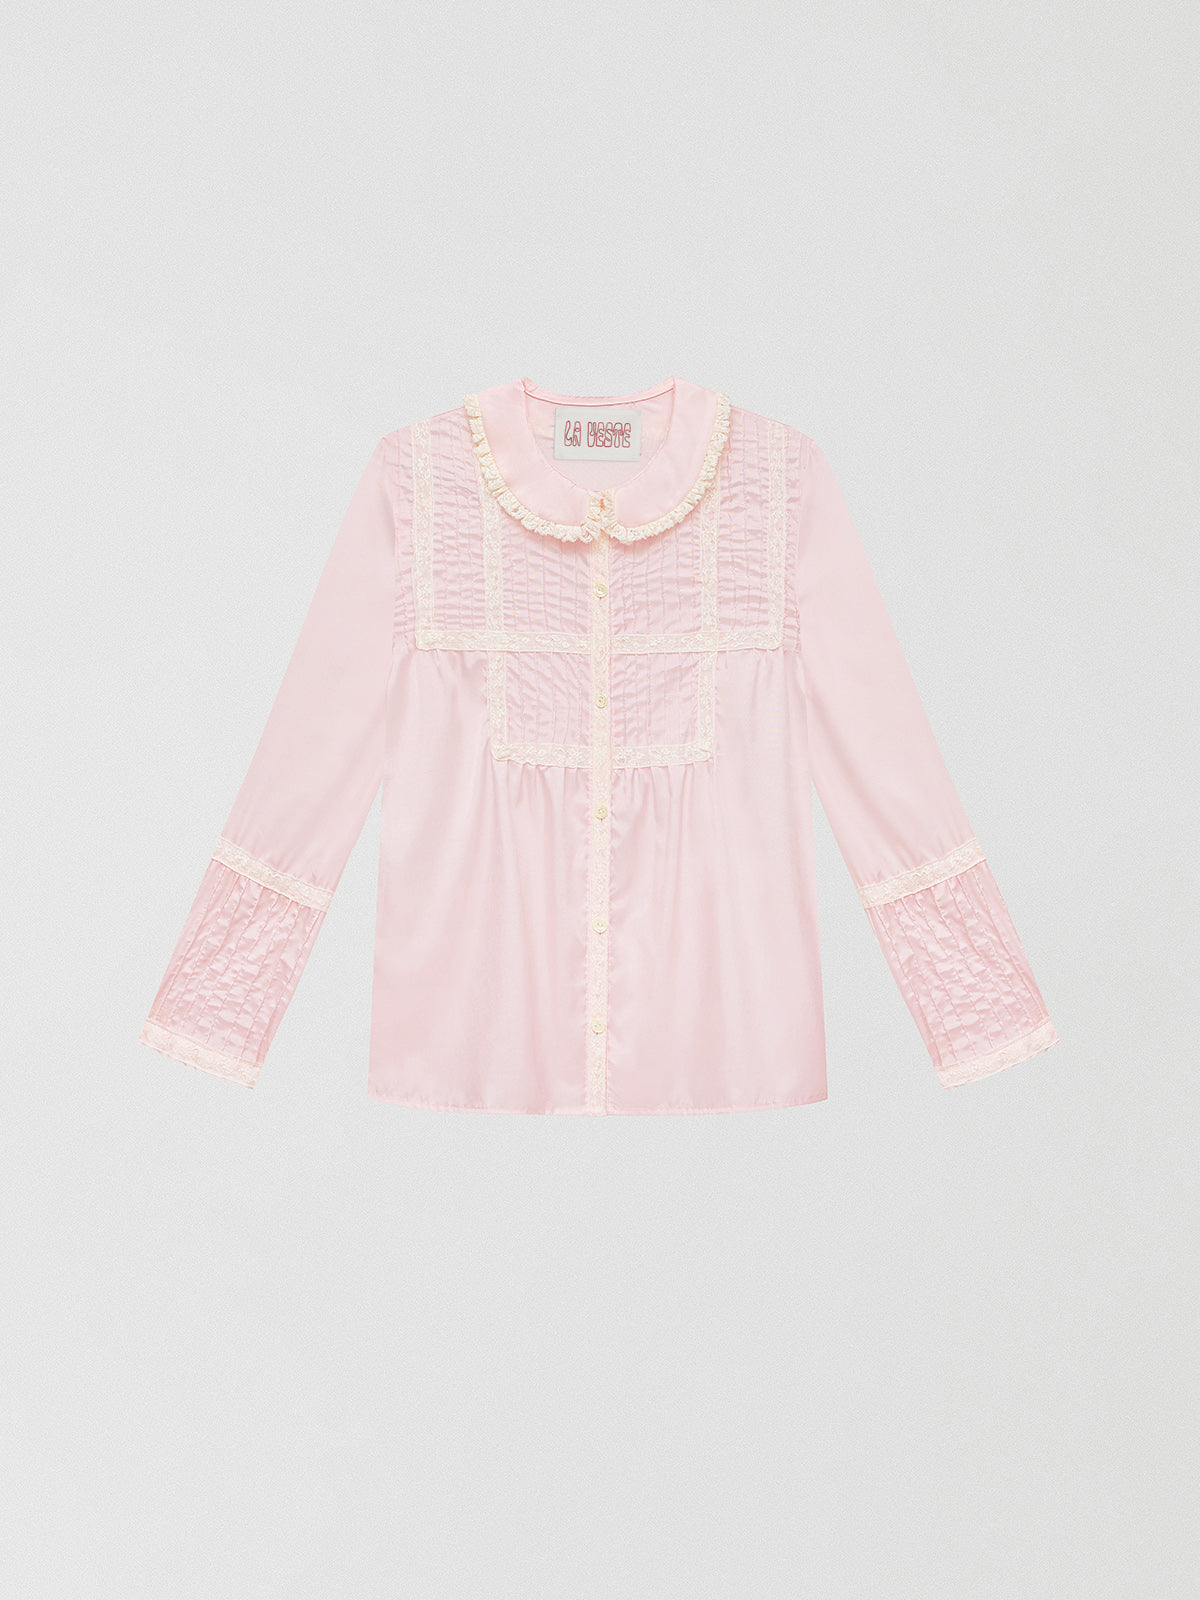 Pink shirt with geometric lace pattern and pleated details